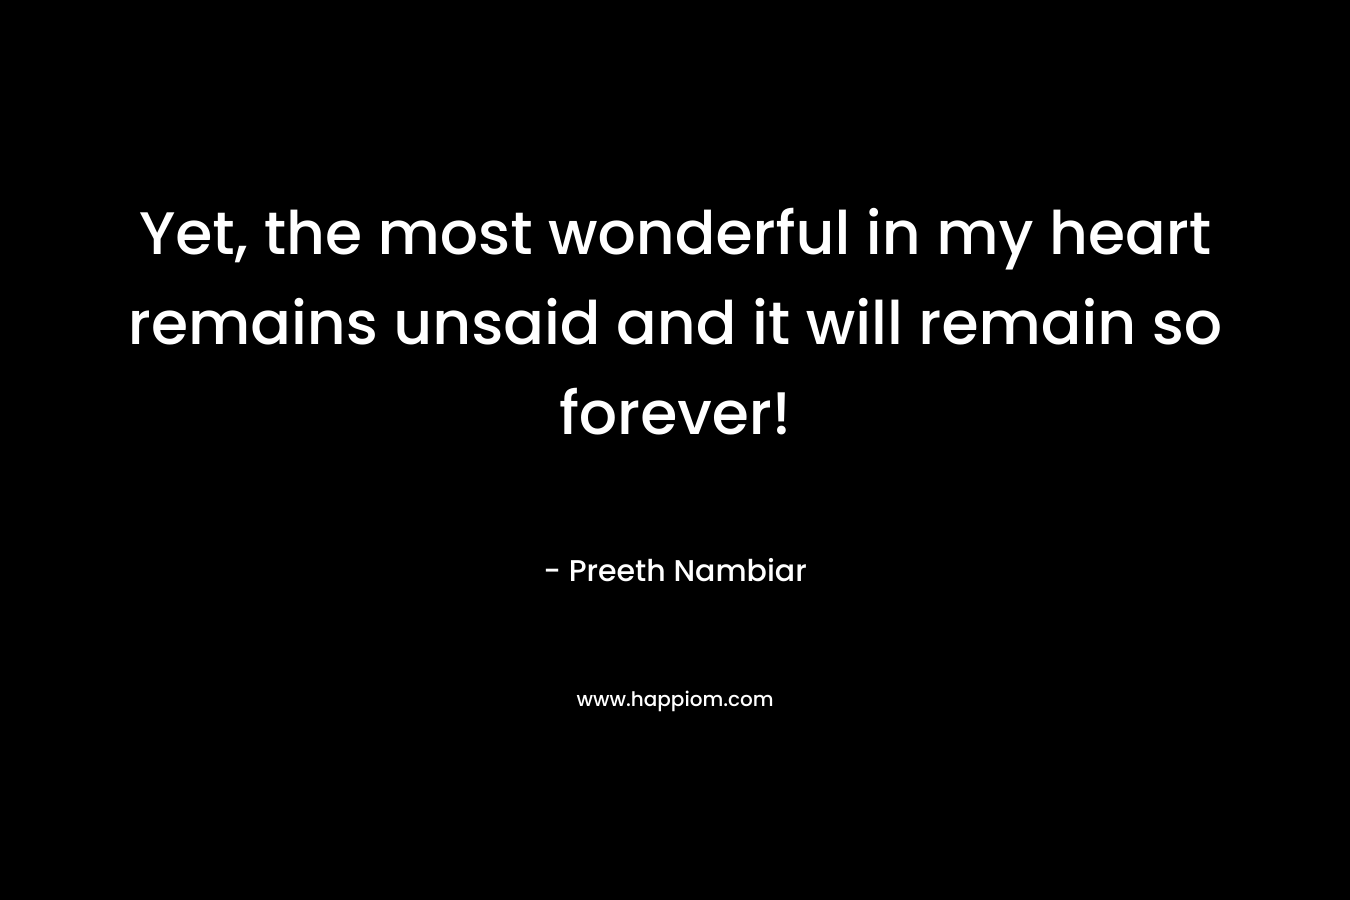 Yet, the most wonderful in my heart remains unsaid and it will remain so forever! – Preeth Nambiar